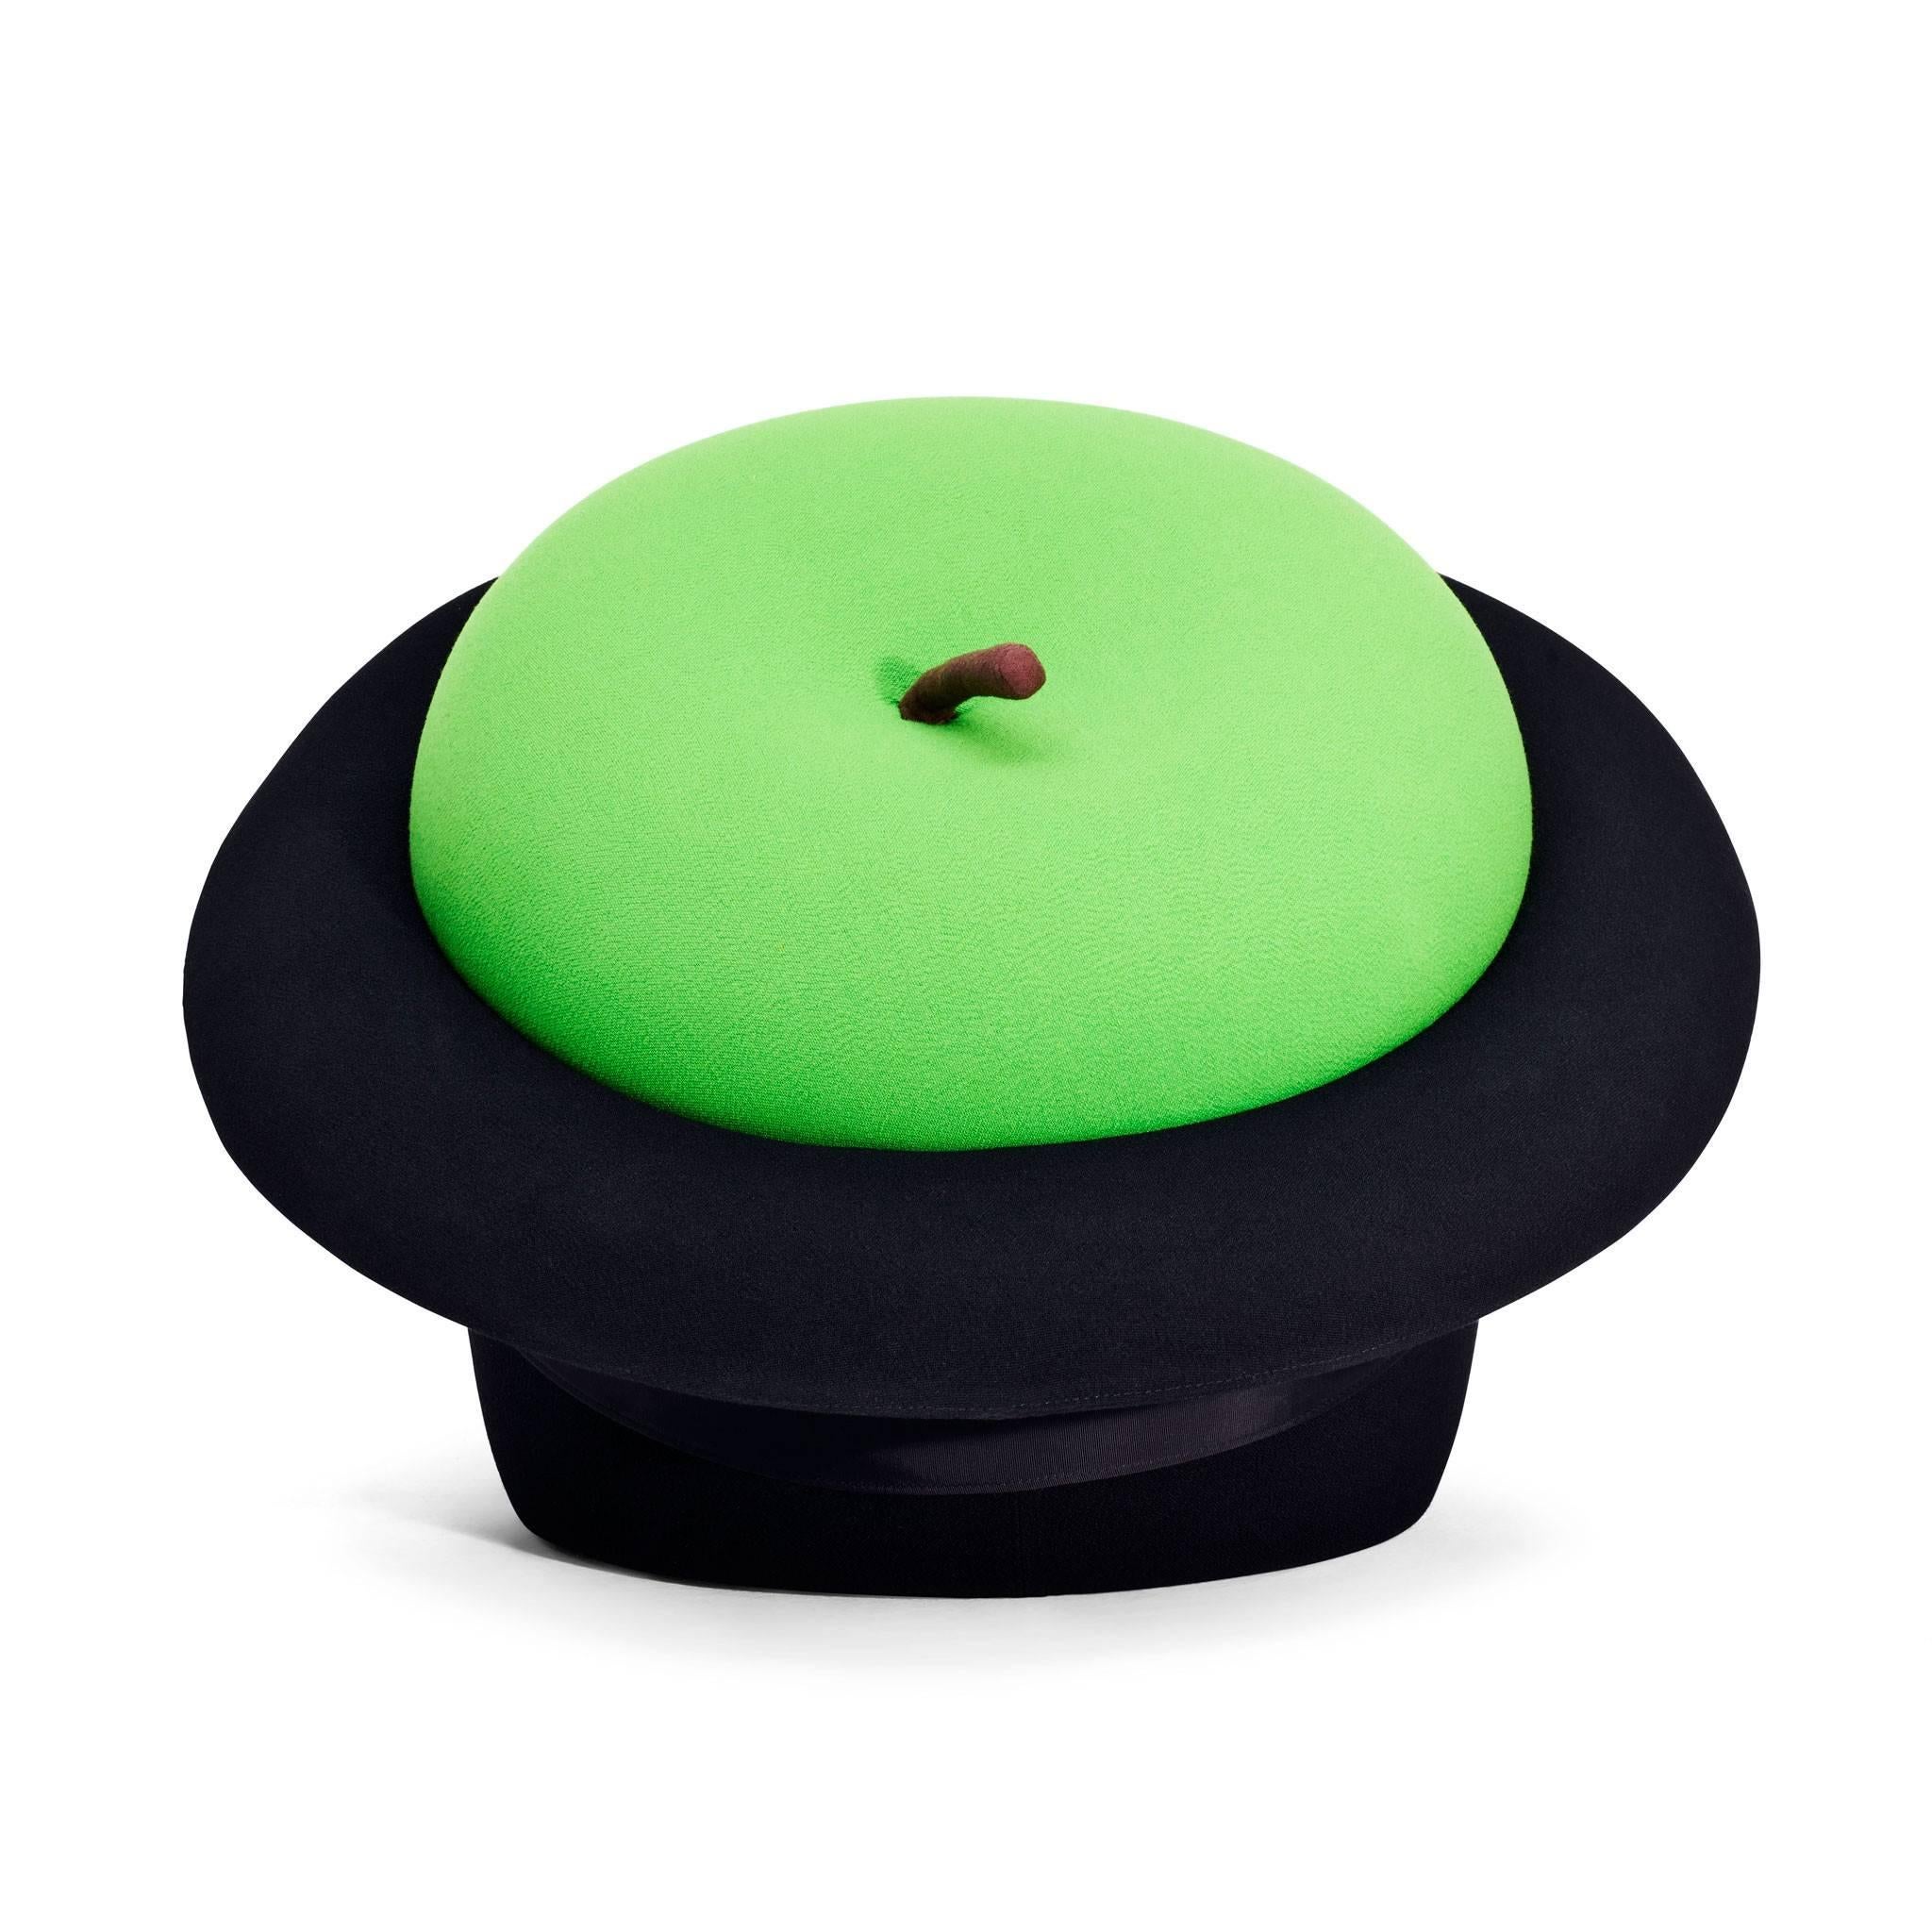 The green apple and the black bowler hat, recurrent figurative elements in the works of René Magritte, are assembled by the visionary imagination of Sebastián Matta. The ABS hat works as the structure while the apple, made of soft polyurethane foam